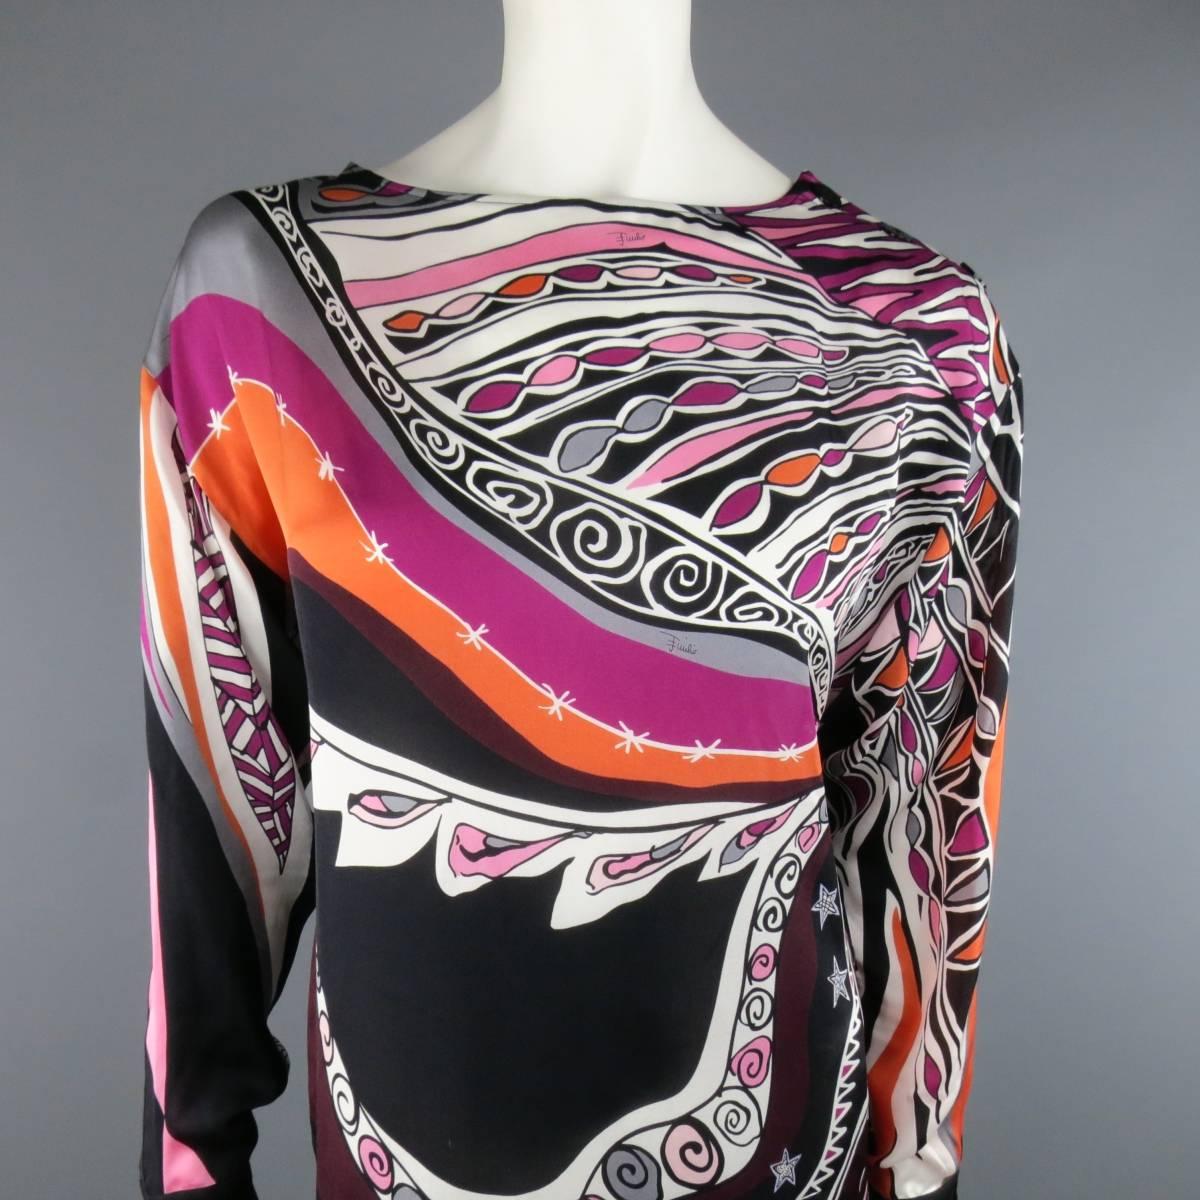 EMILIO PUCCI silk multi-colored abstract print shift dress in hues of black, beige, orange, pink, and burguny features a boat neck with side button collar and long sleeves. Made in Italy.
 
Excellent Pre-Owned Condition. With Tags. Retails at